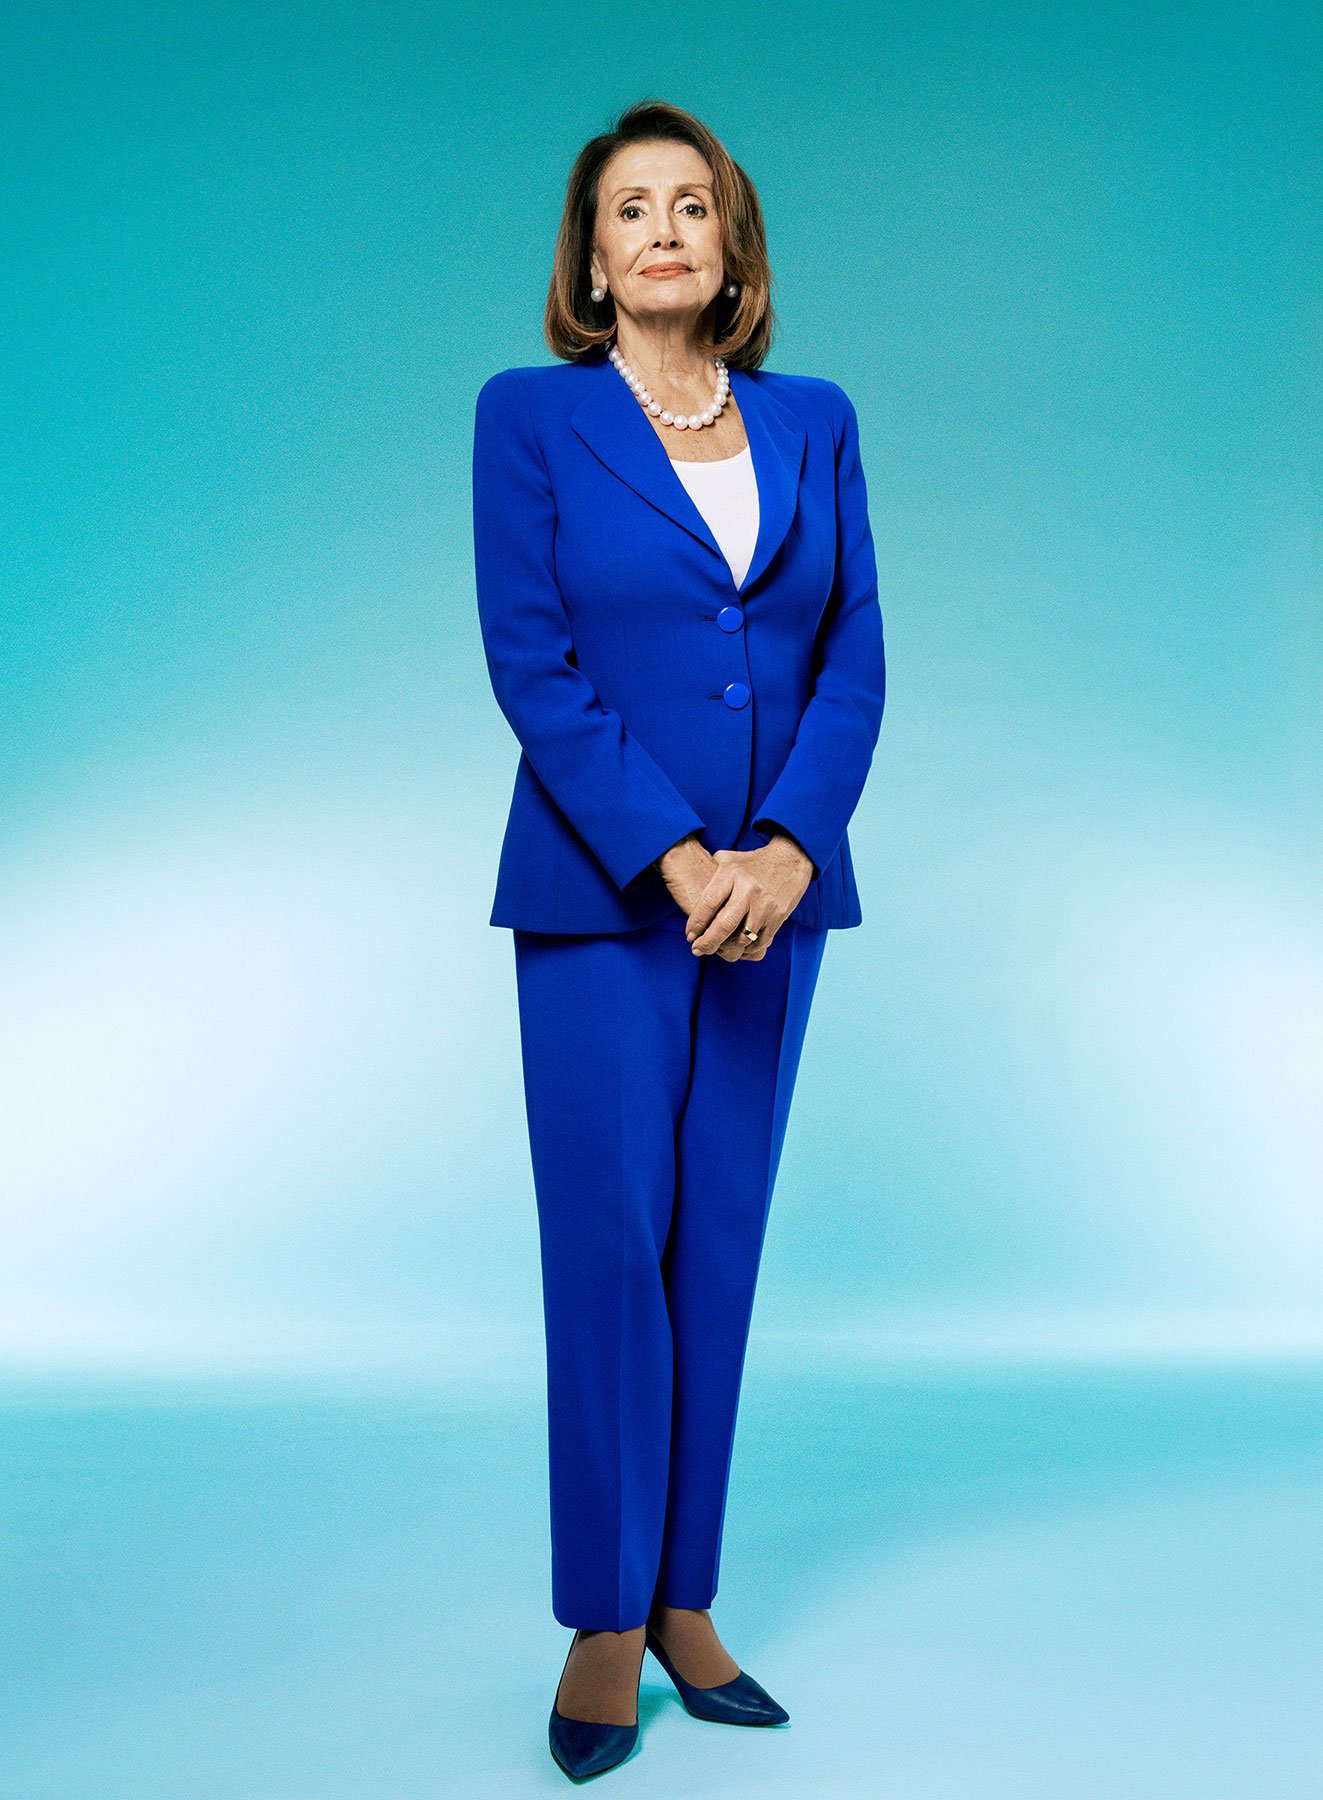 Nancy Pelosi Is on the 2019 TIME 100 List.